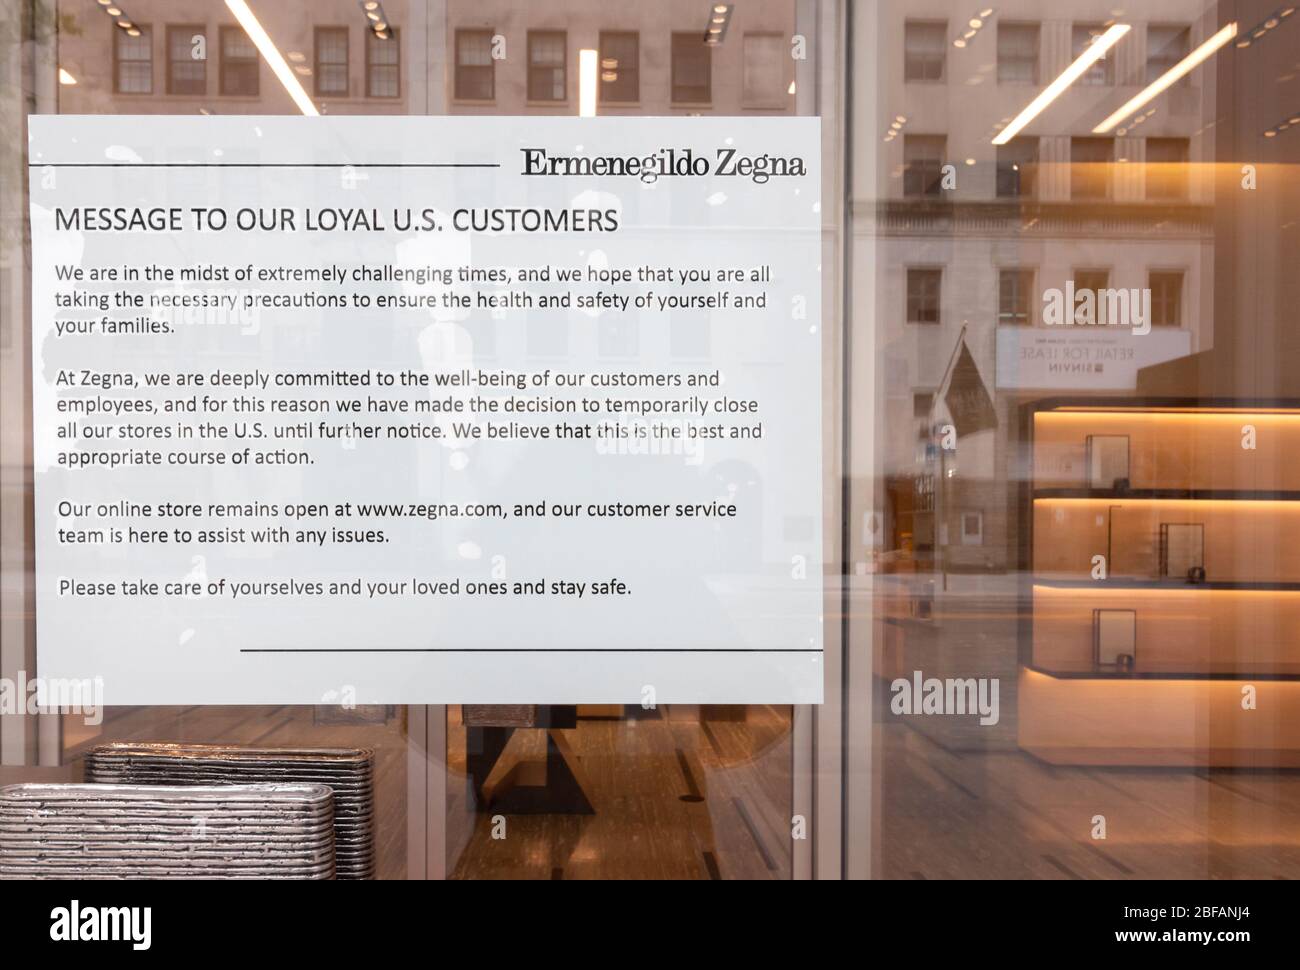 temporarily closed sign in the Ermenegildo Zegna shop on w 57th st., due to the coronavirus or covid-19 pandemic, in the background are empty shelves Stock Photo